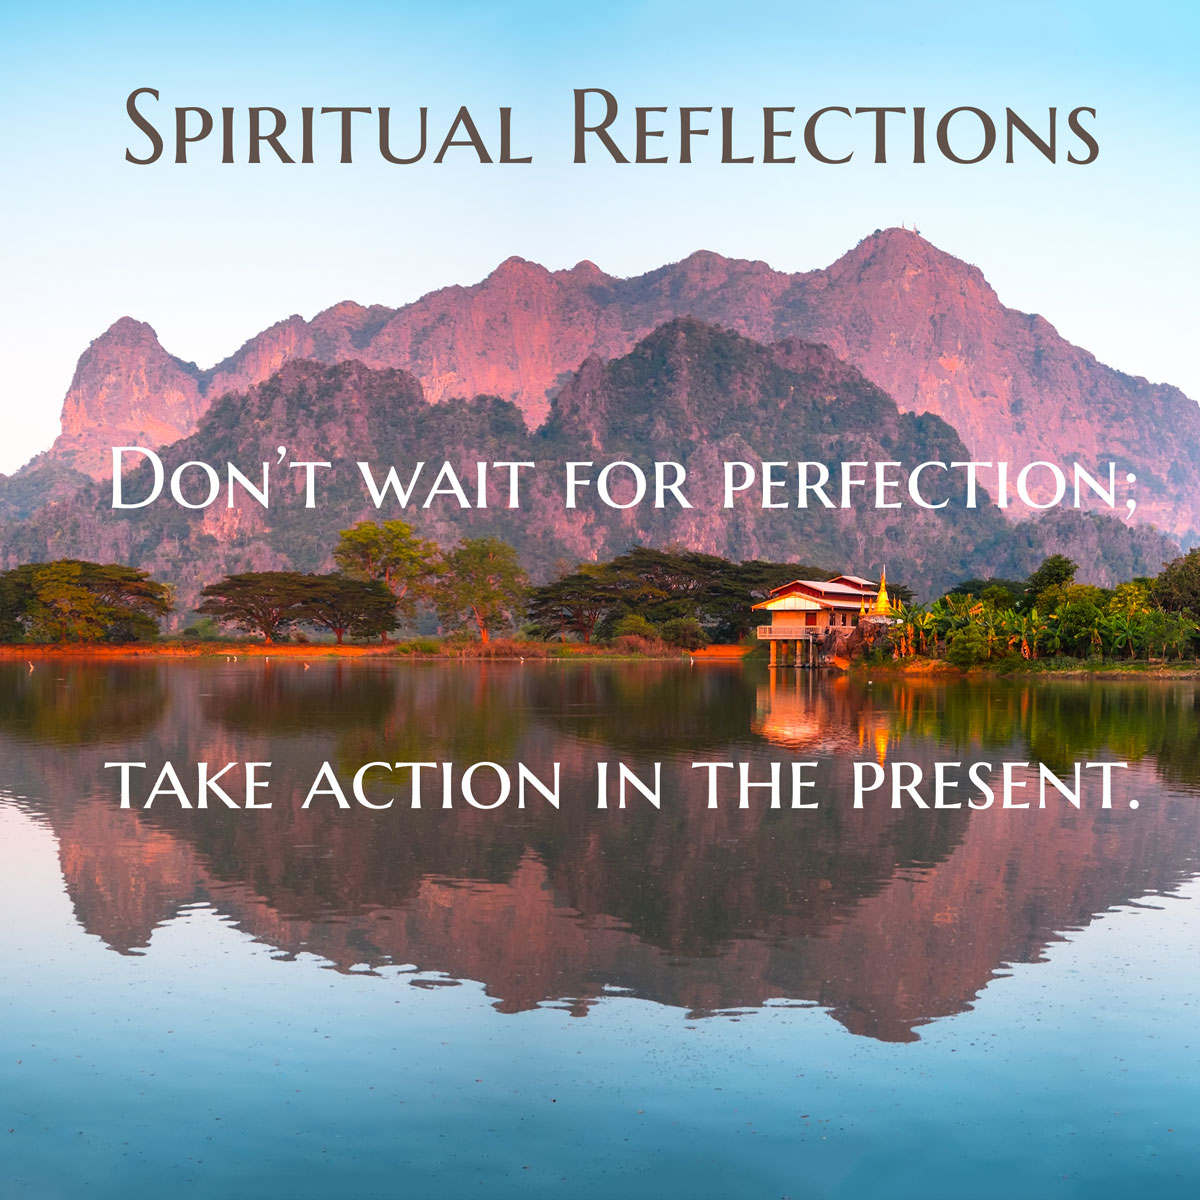 Don't wait for perfection; take action in the present.